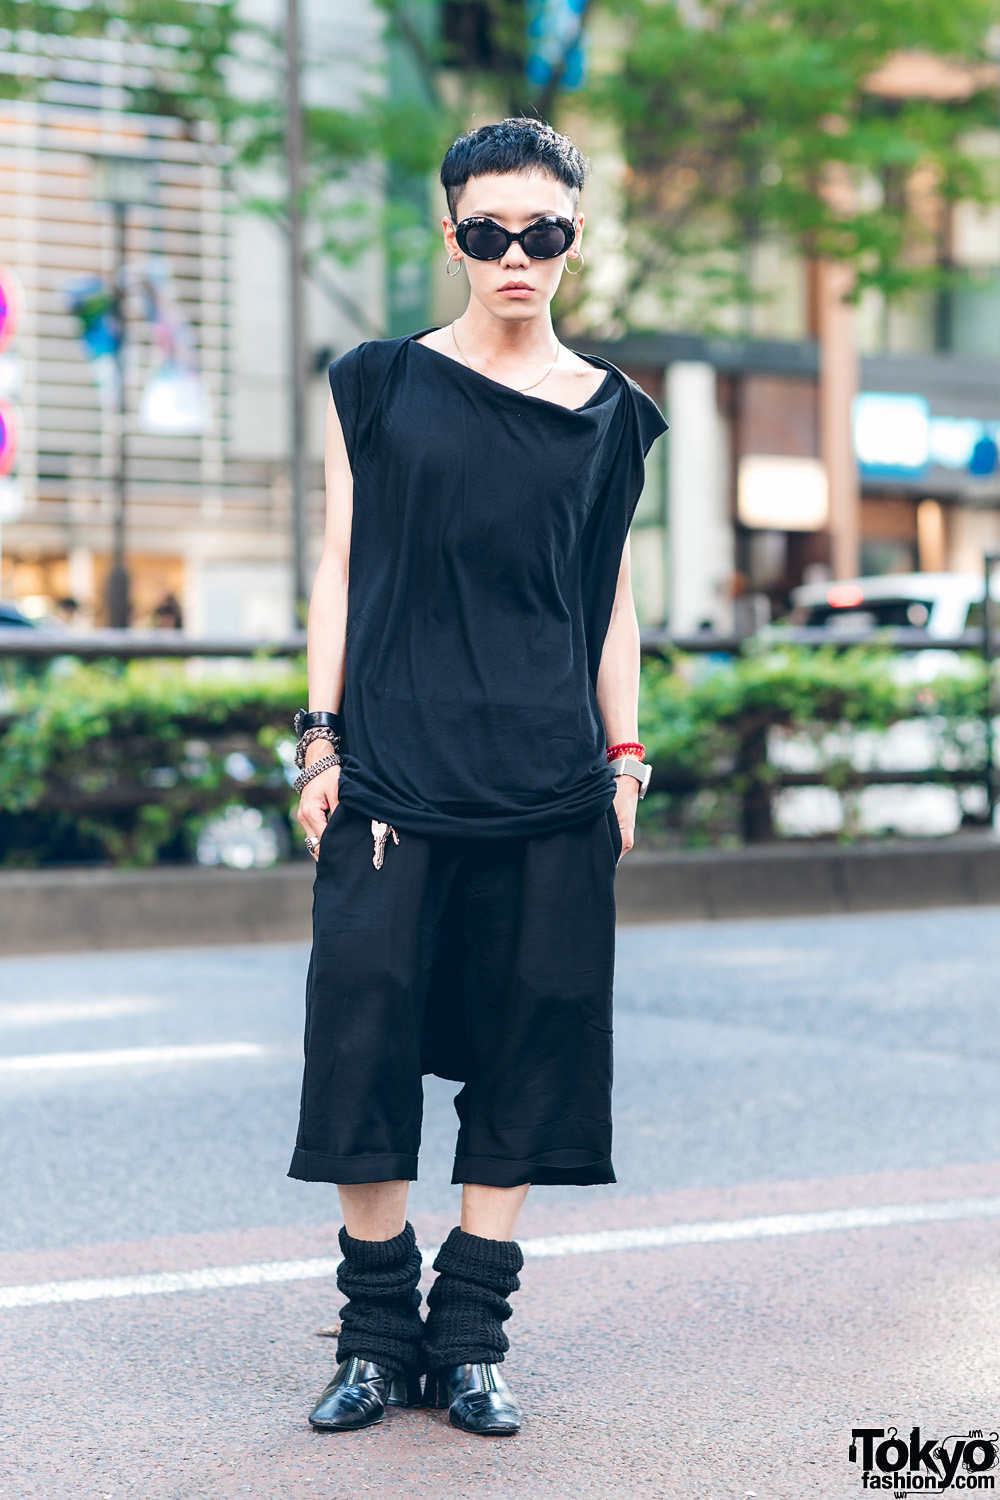 The Symbolic Tokyo Designer in All Black Rick Owens Streetwear Style w/ Asymmetrical Shirt, Cropped Linen Pants, Chrome Hearts Jewelry, Knit Legwarmers & Pointy Boots